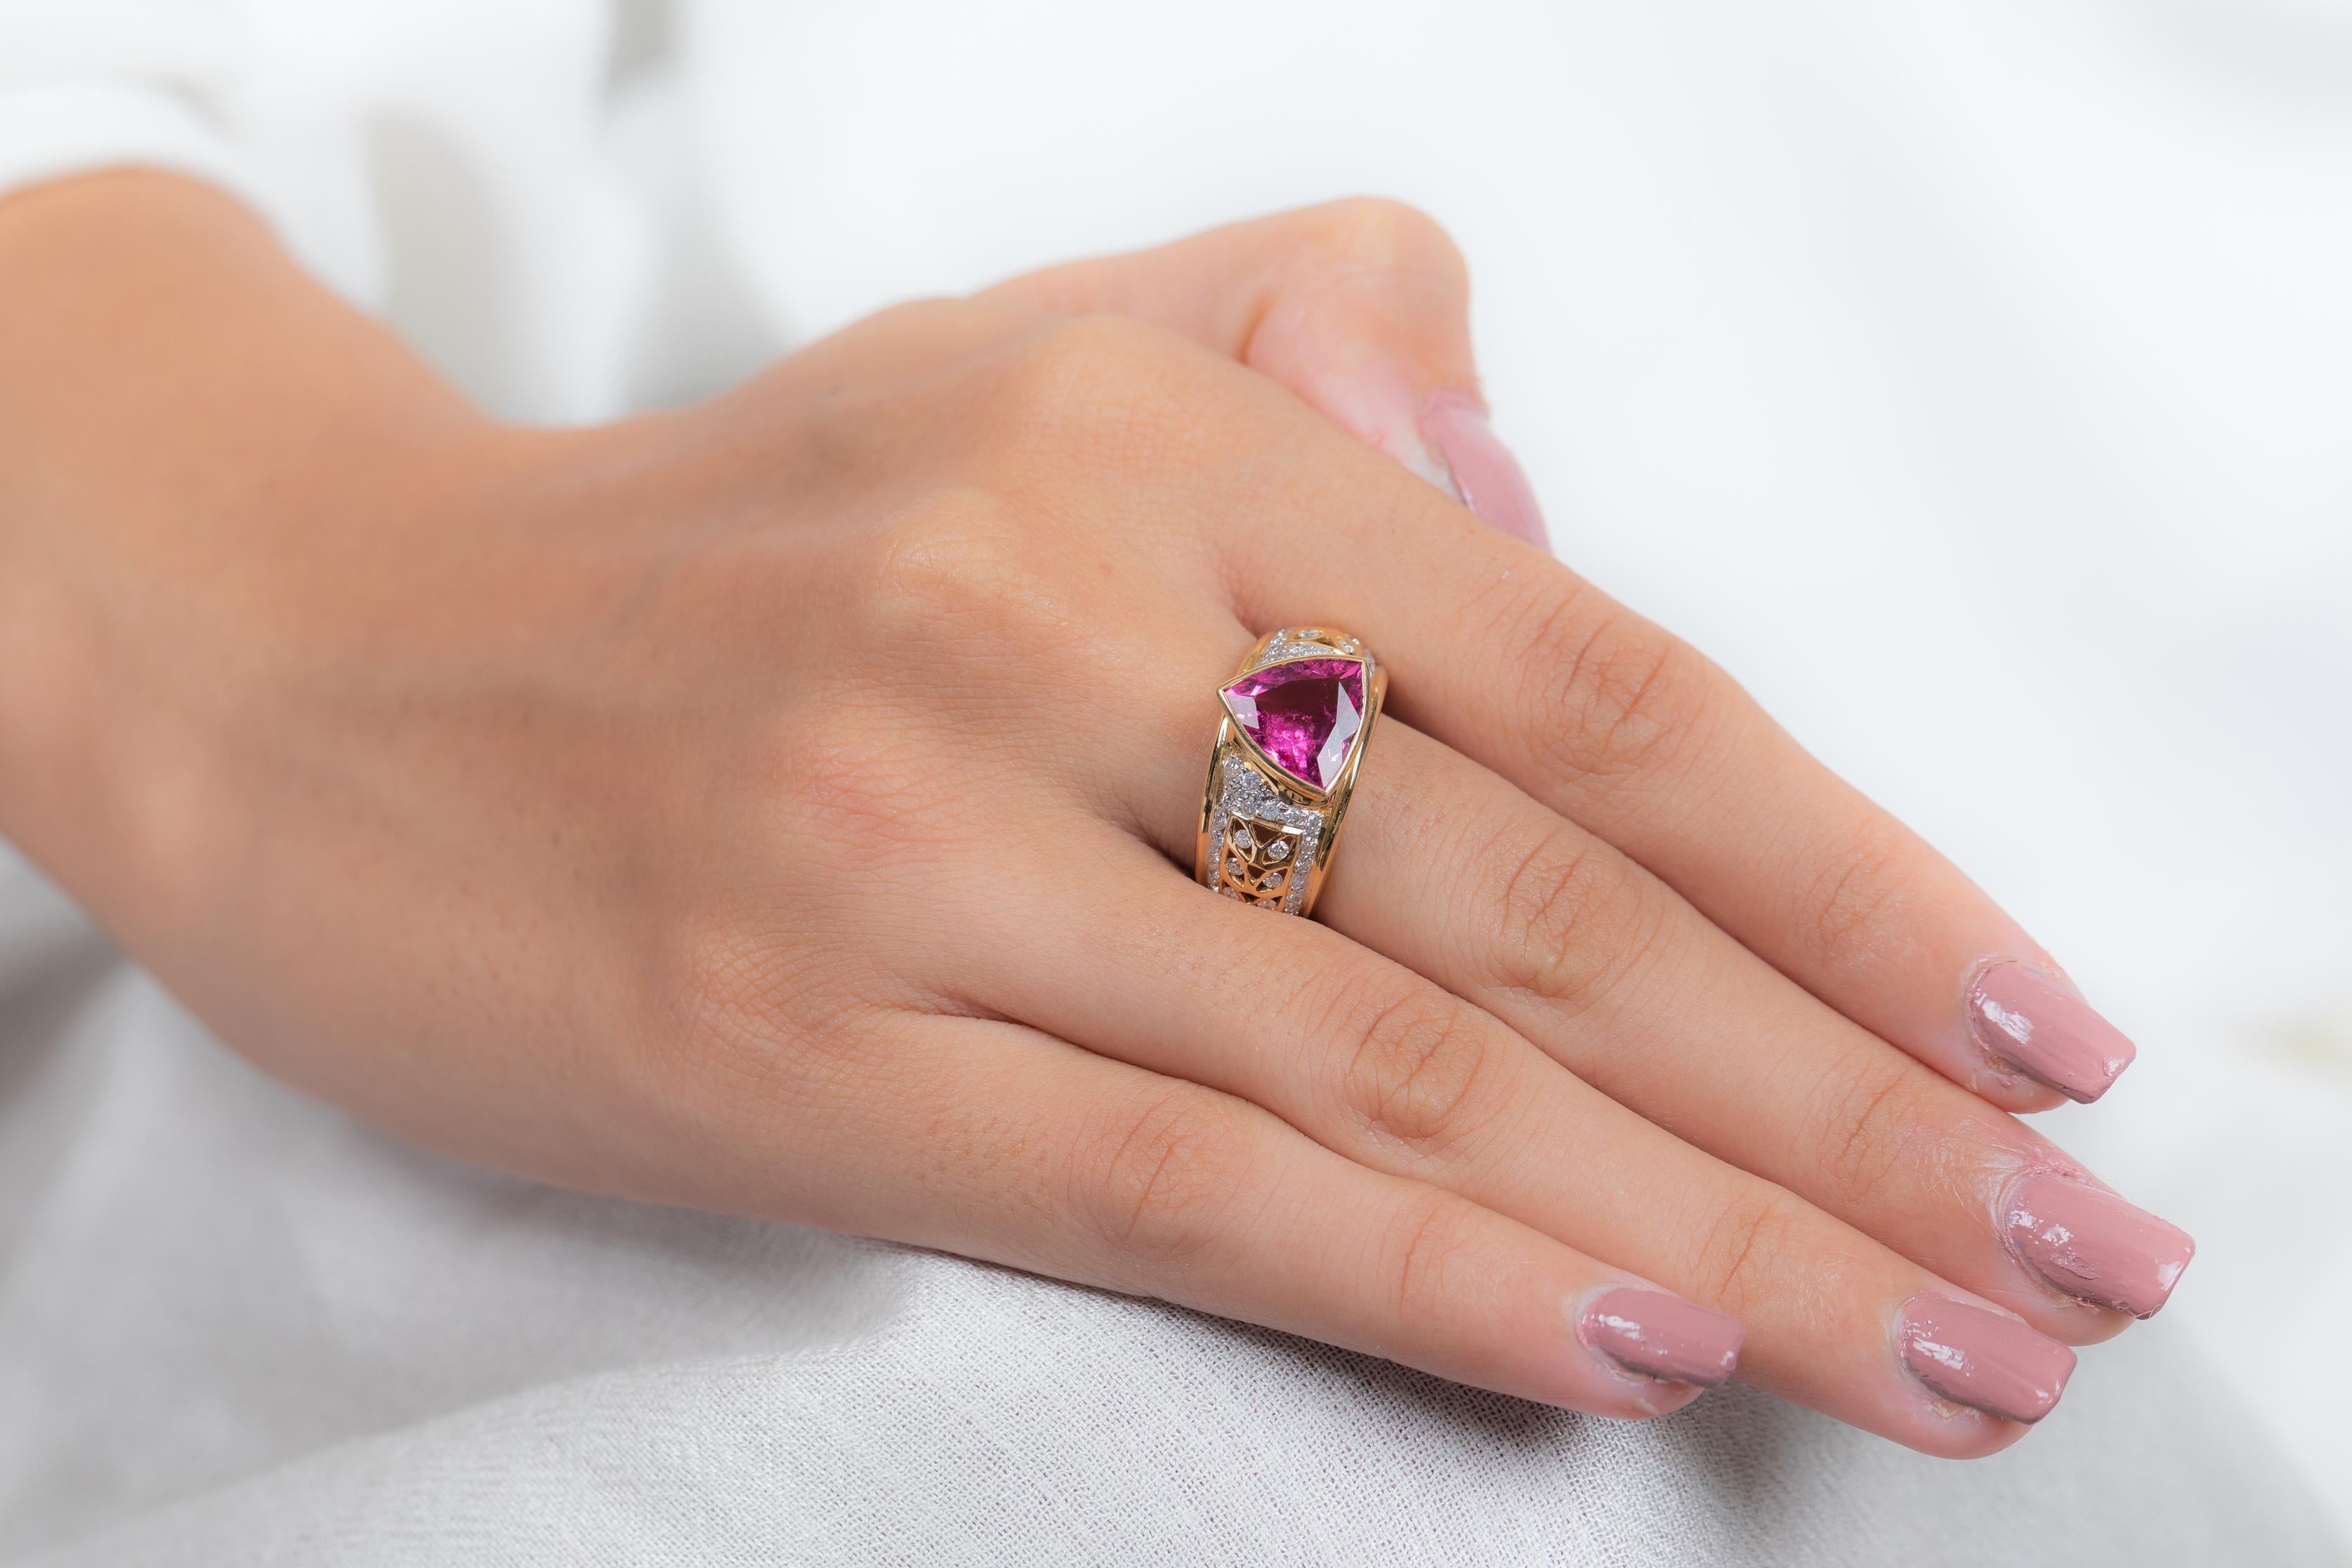 For Sale:  2.81 Carat Trillion cut Ruby Diamond Bridal Ring in 18K Yellow Gold  4